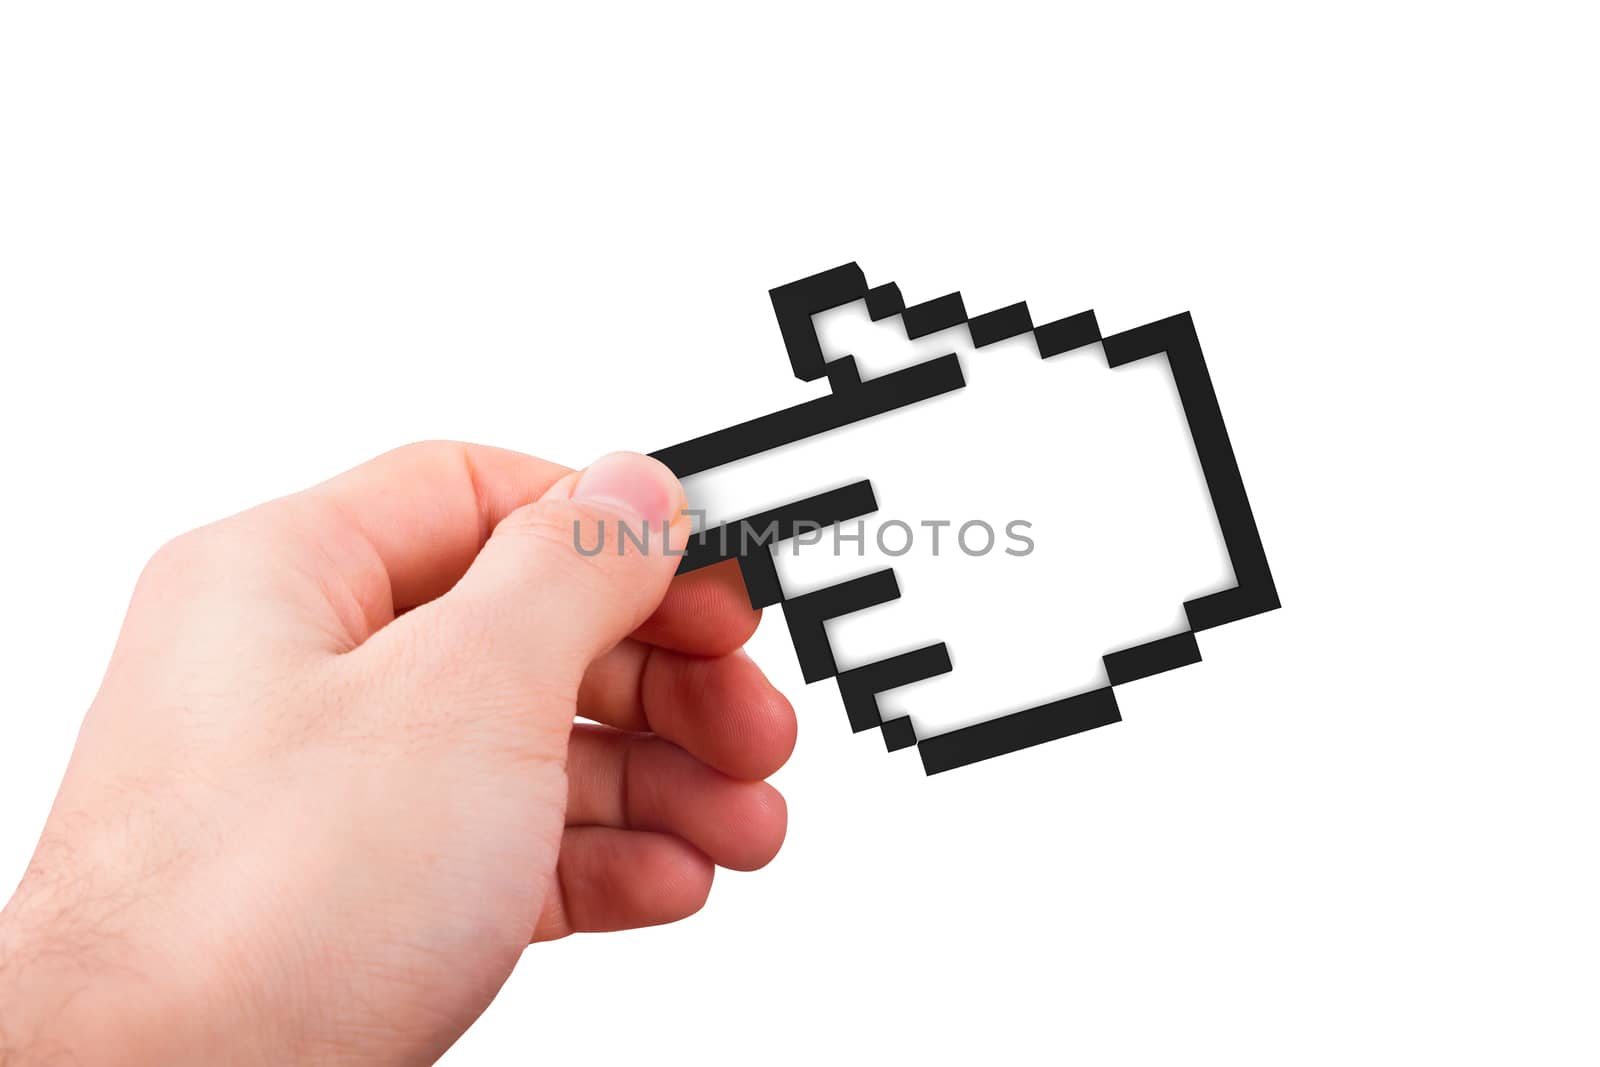 Hand holding computer mouse hand cursor icon, isolated on white background.